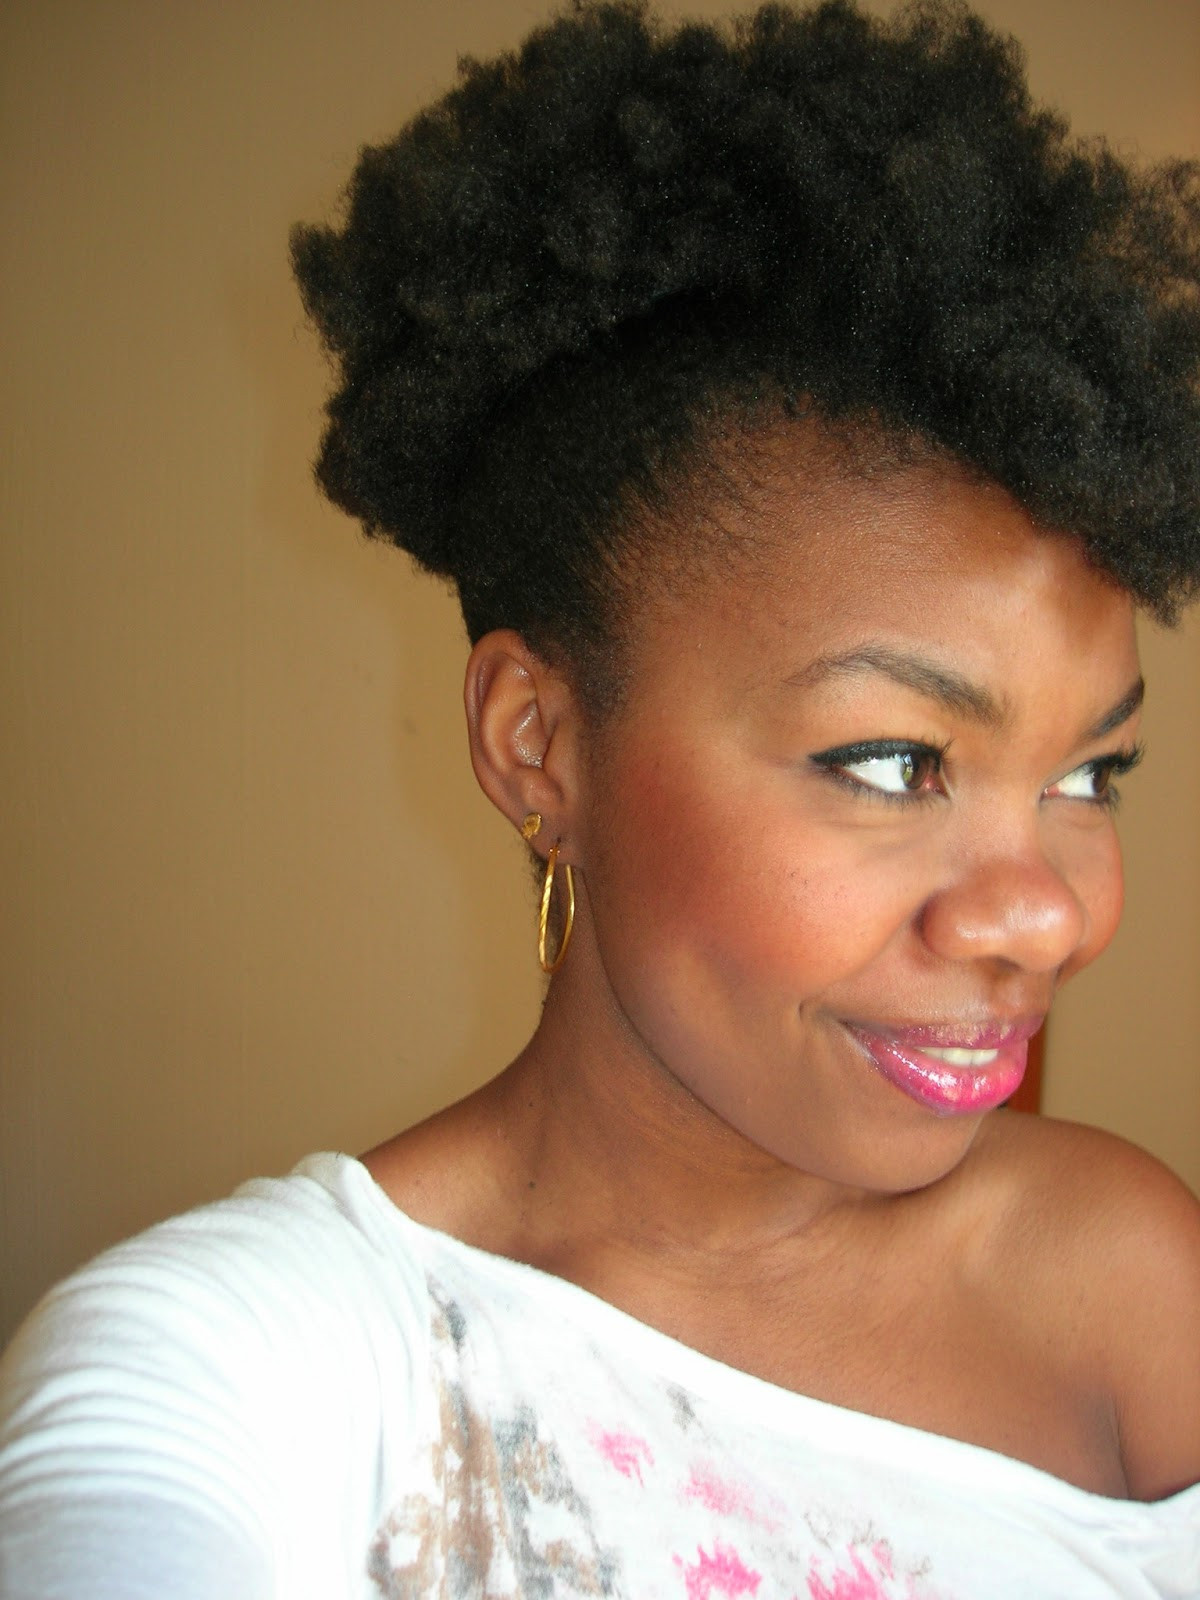 Hairstyles For Natural African Hair
 5 Things to think about when switching to natural hair